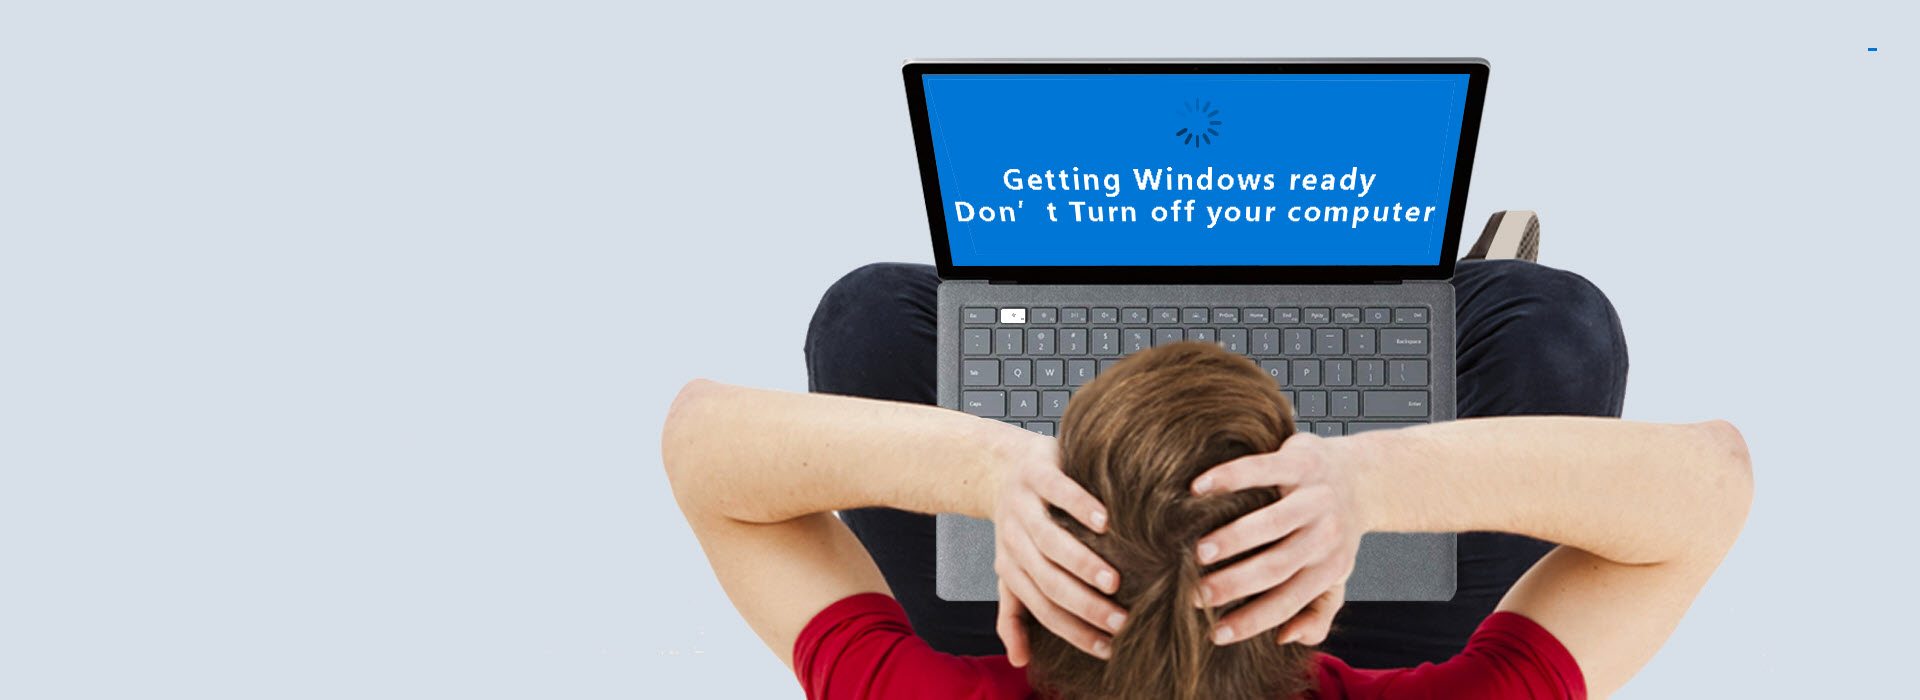 Research shows Windows updates can take six hours to complete